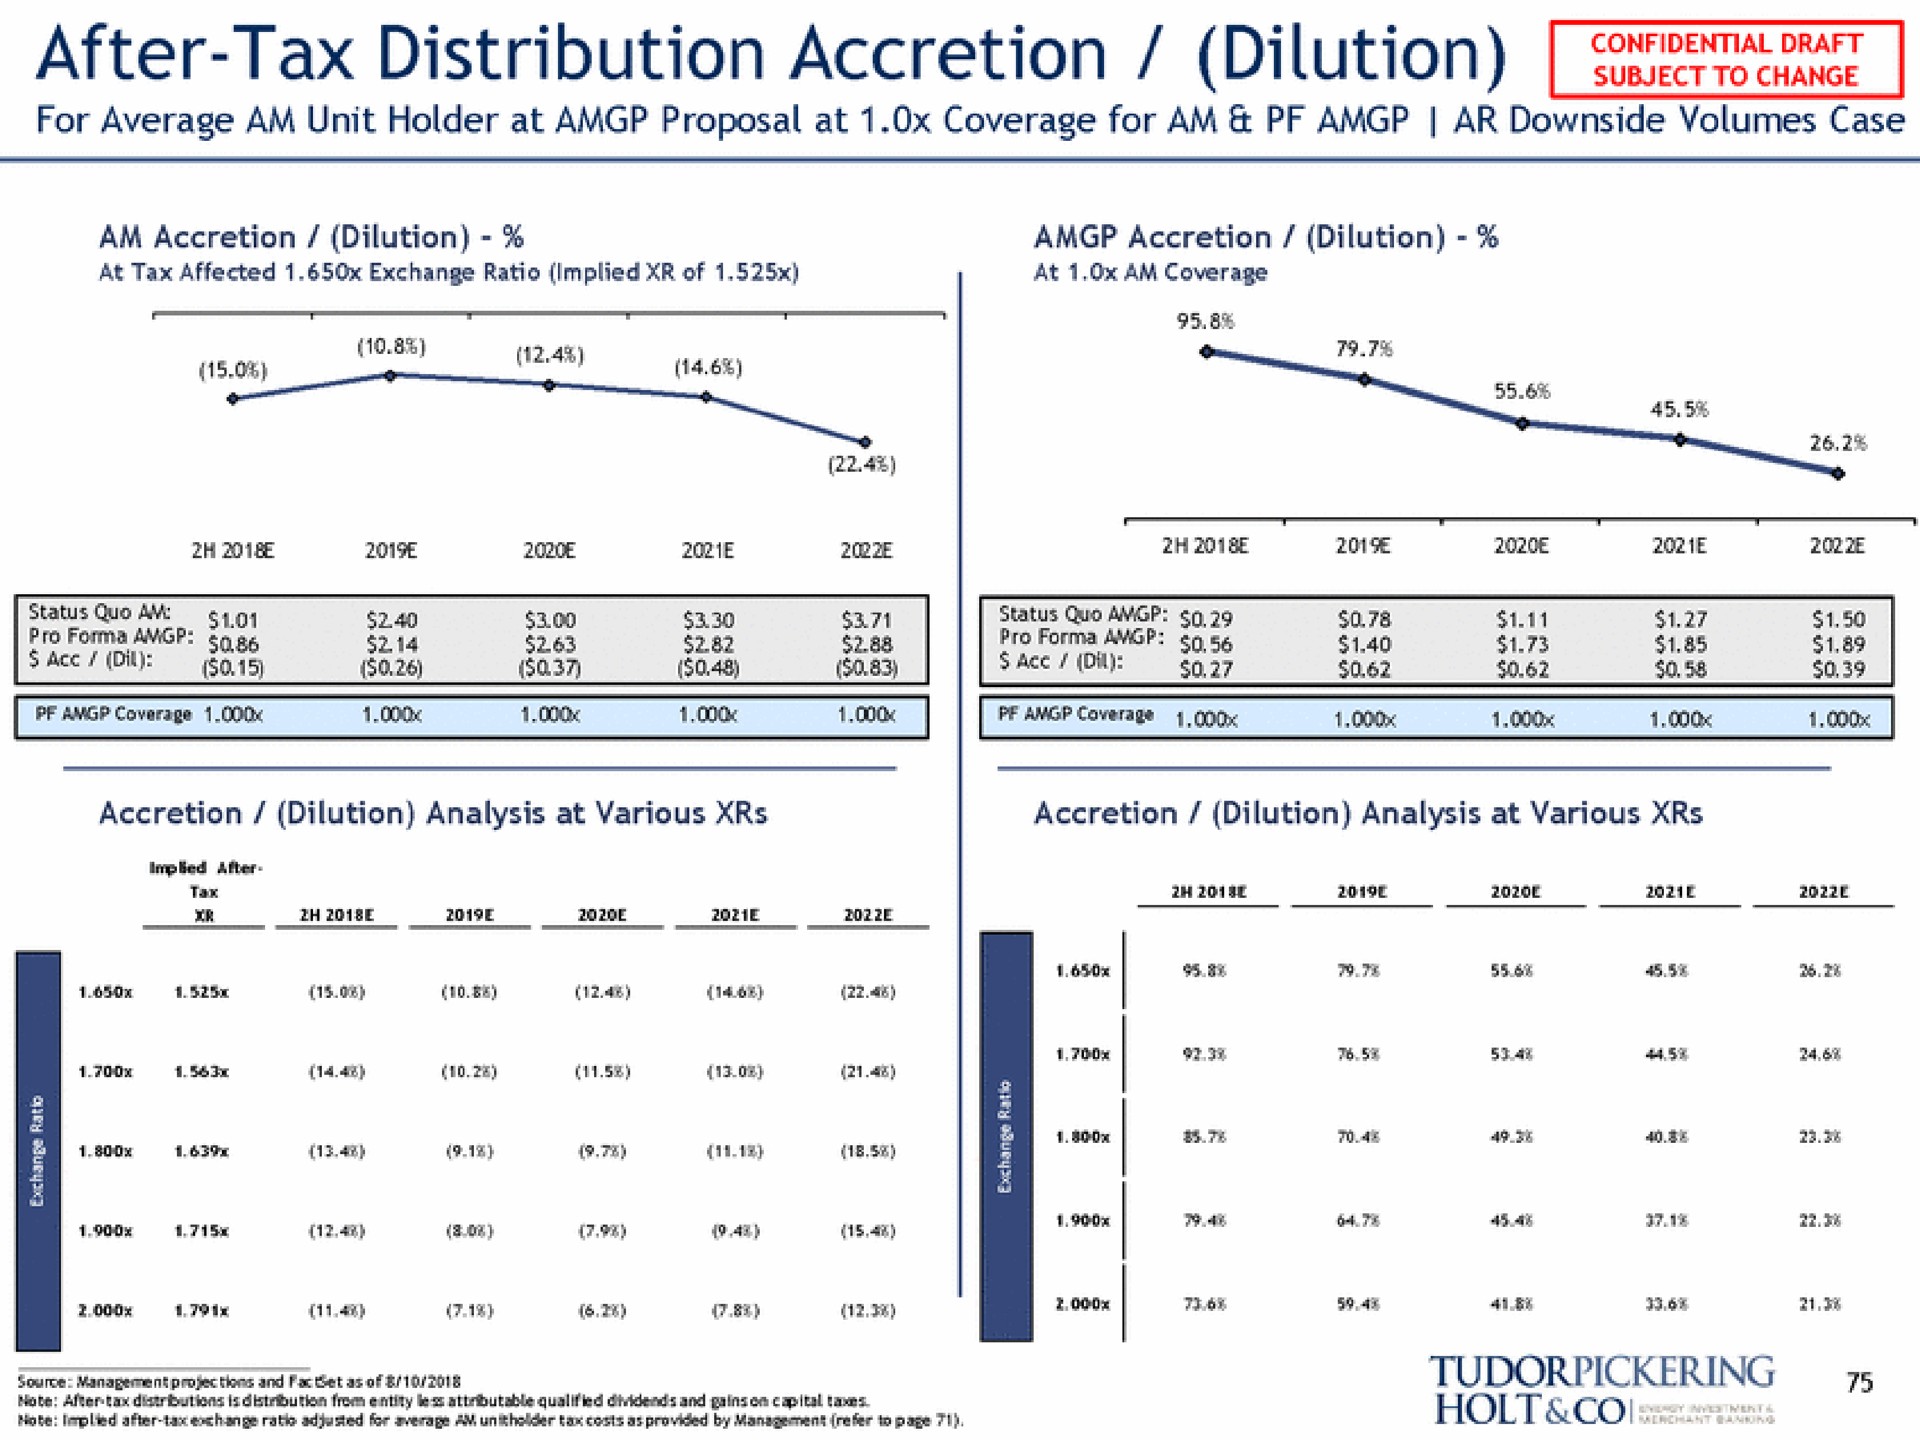 after tax distribution accretion dilution | Tudor, Pickering, Holt & Co